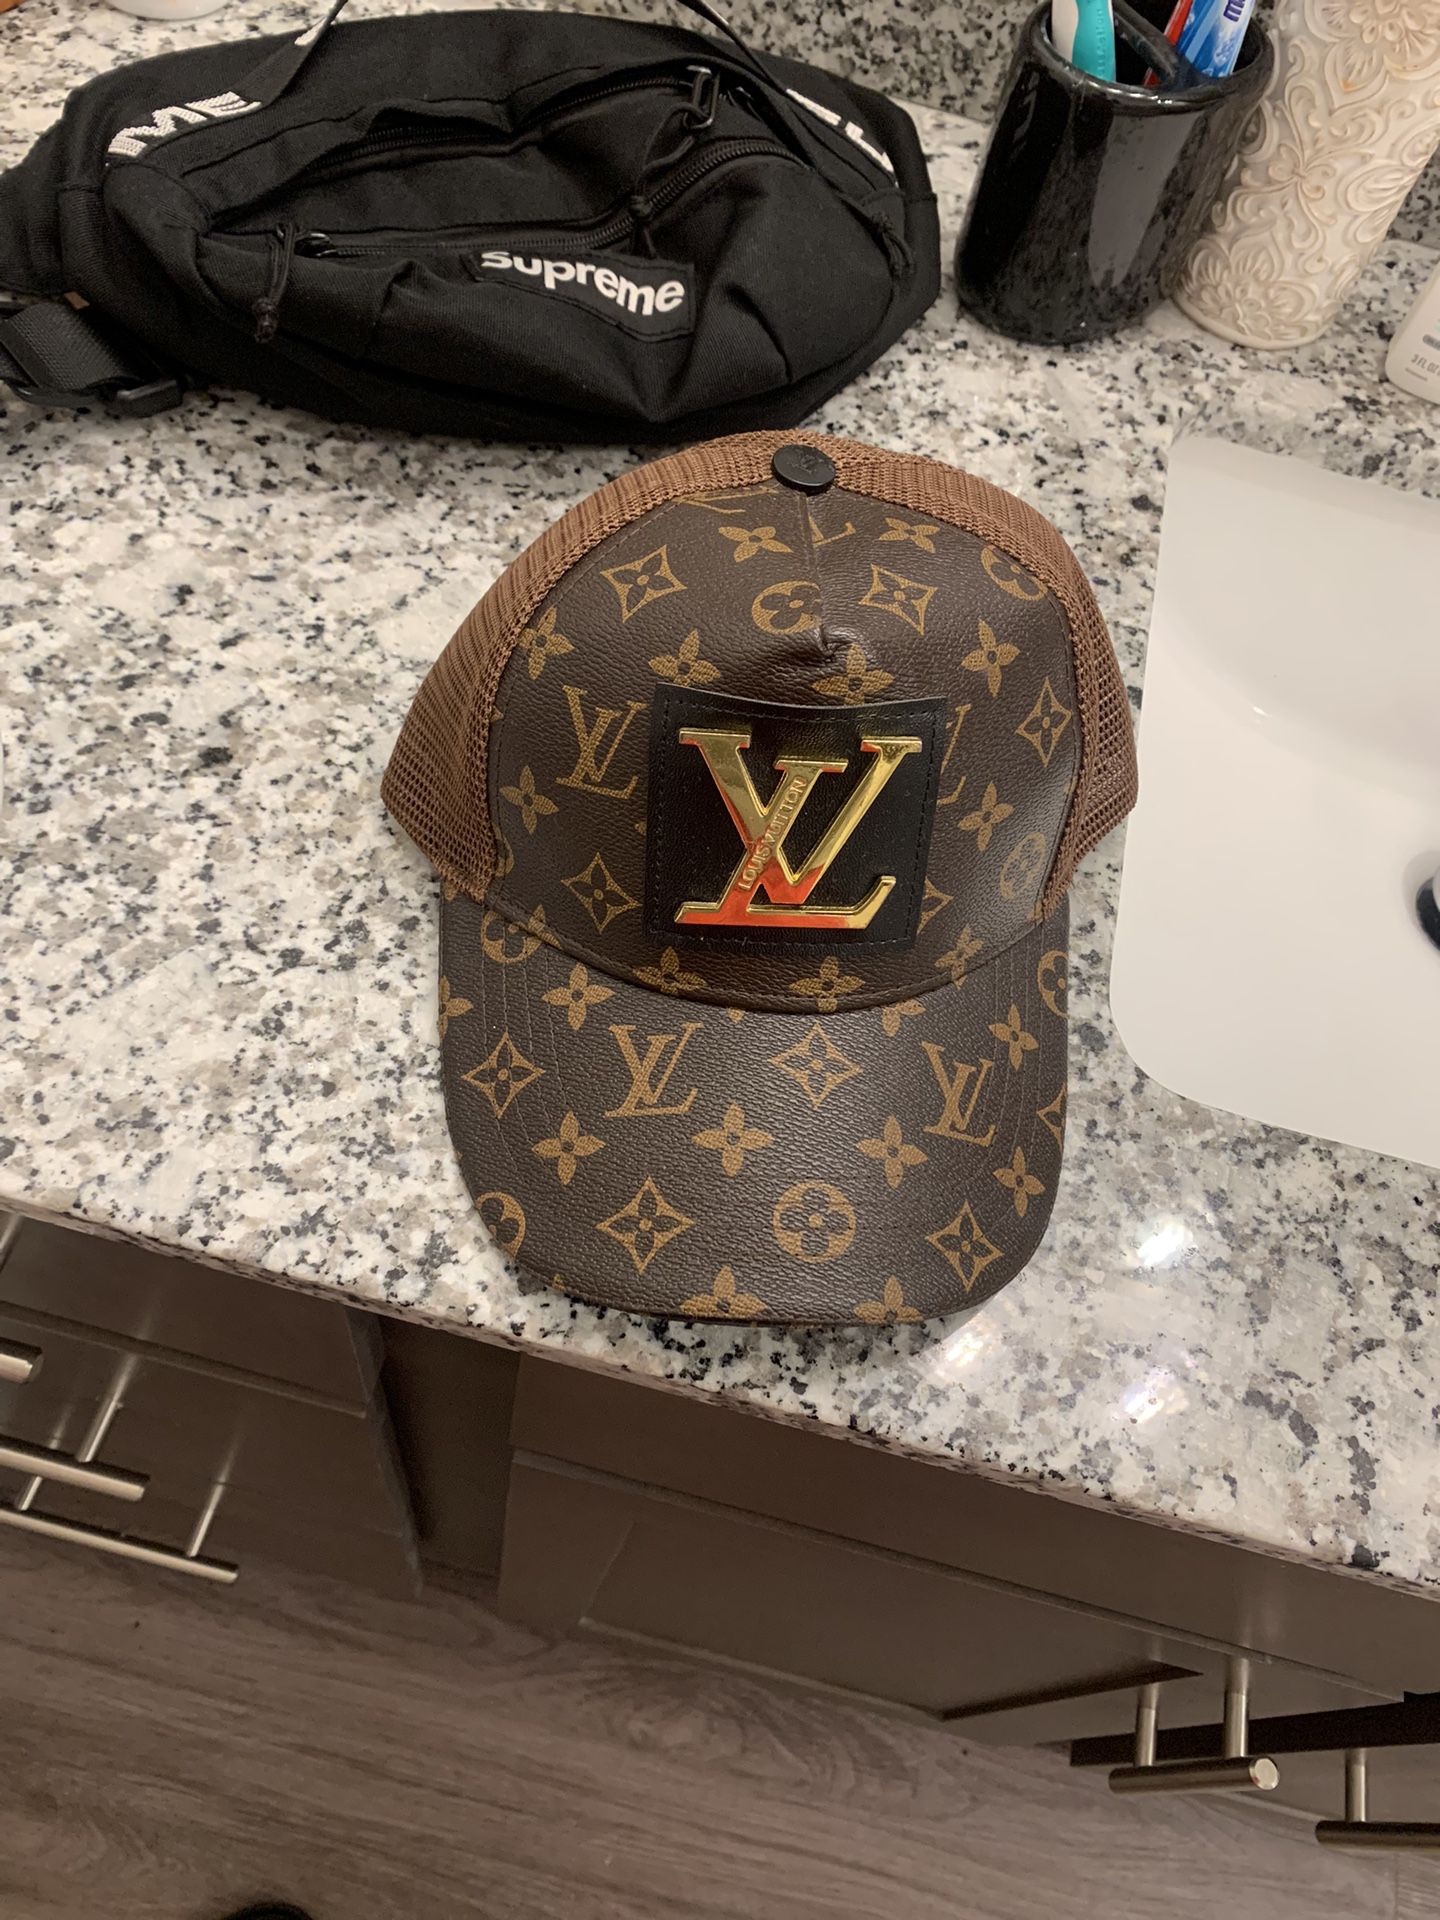 Custom Louis Vuitton Yankees hat for Sale in Queens, NY - OfferUp